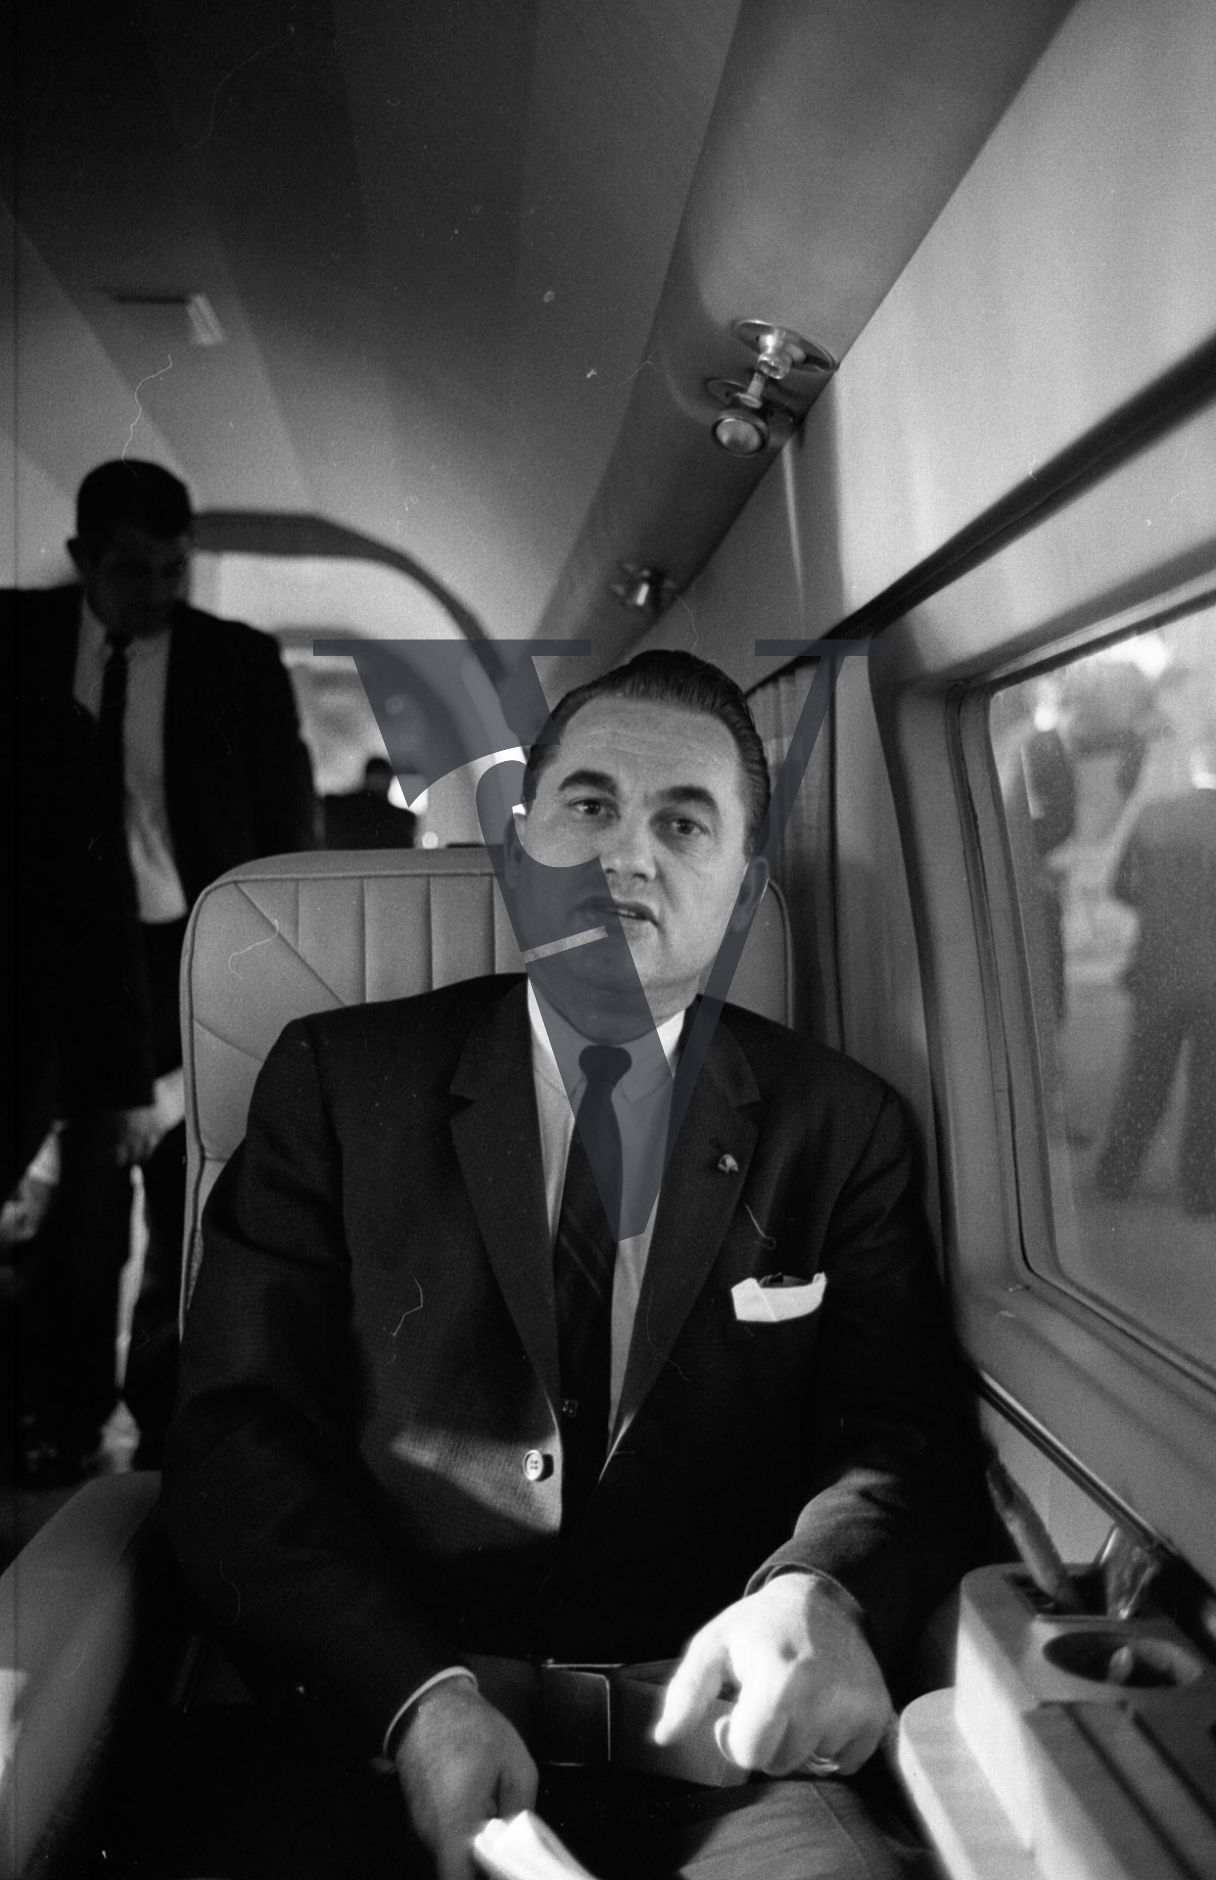 Governor George Wallace, on board plane, portrait, talking.